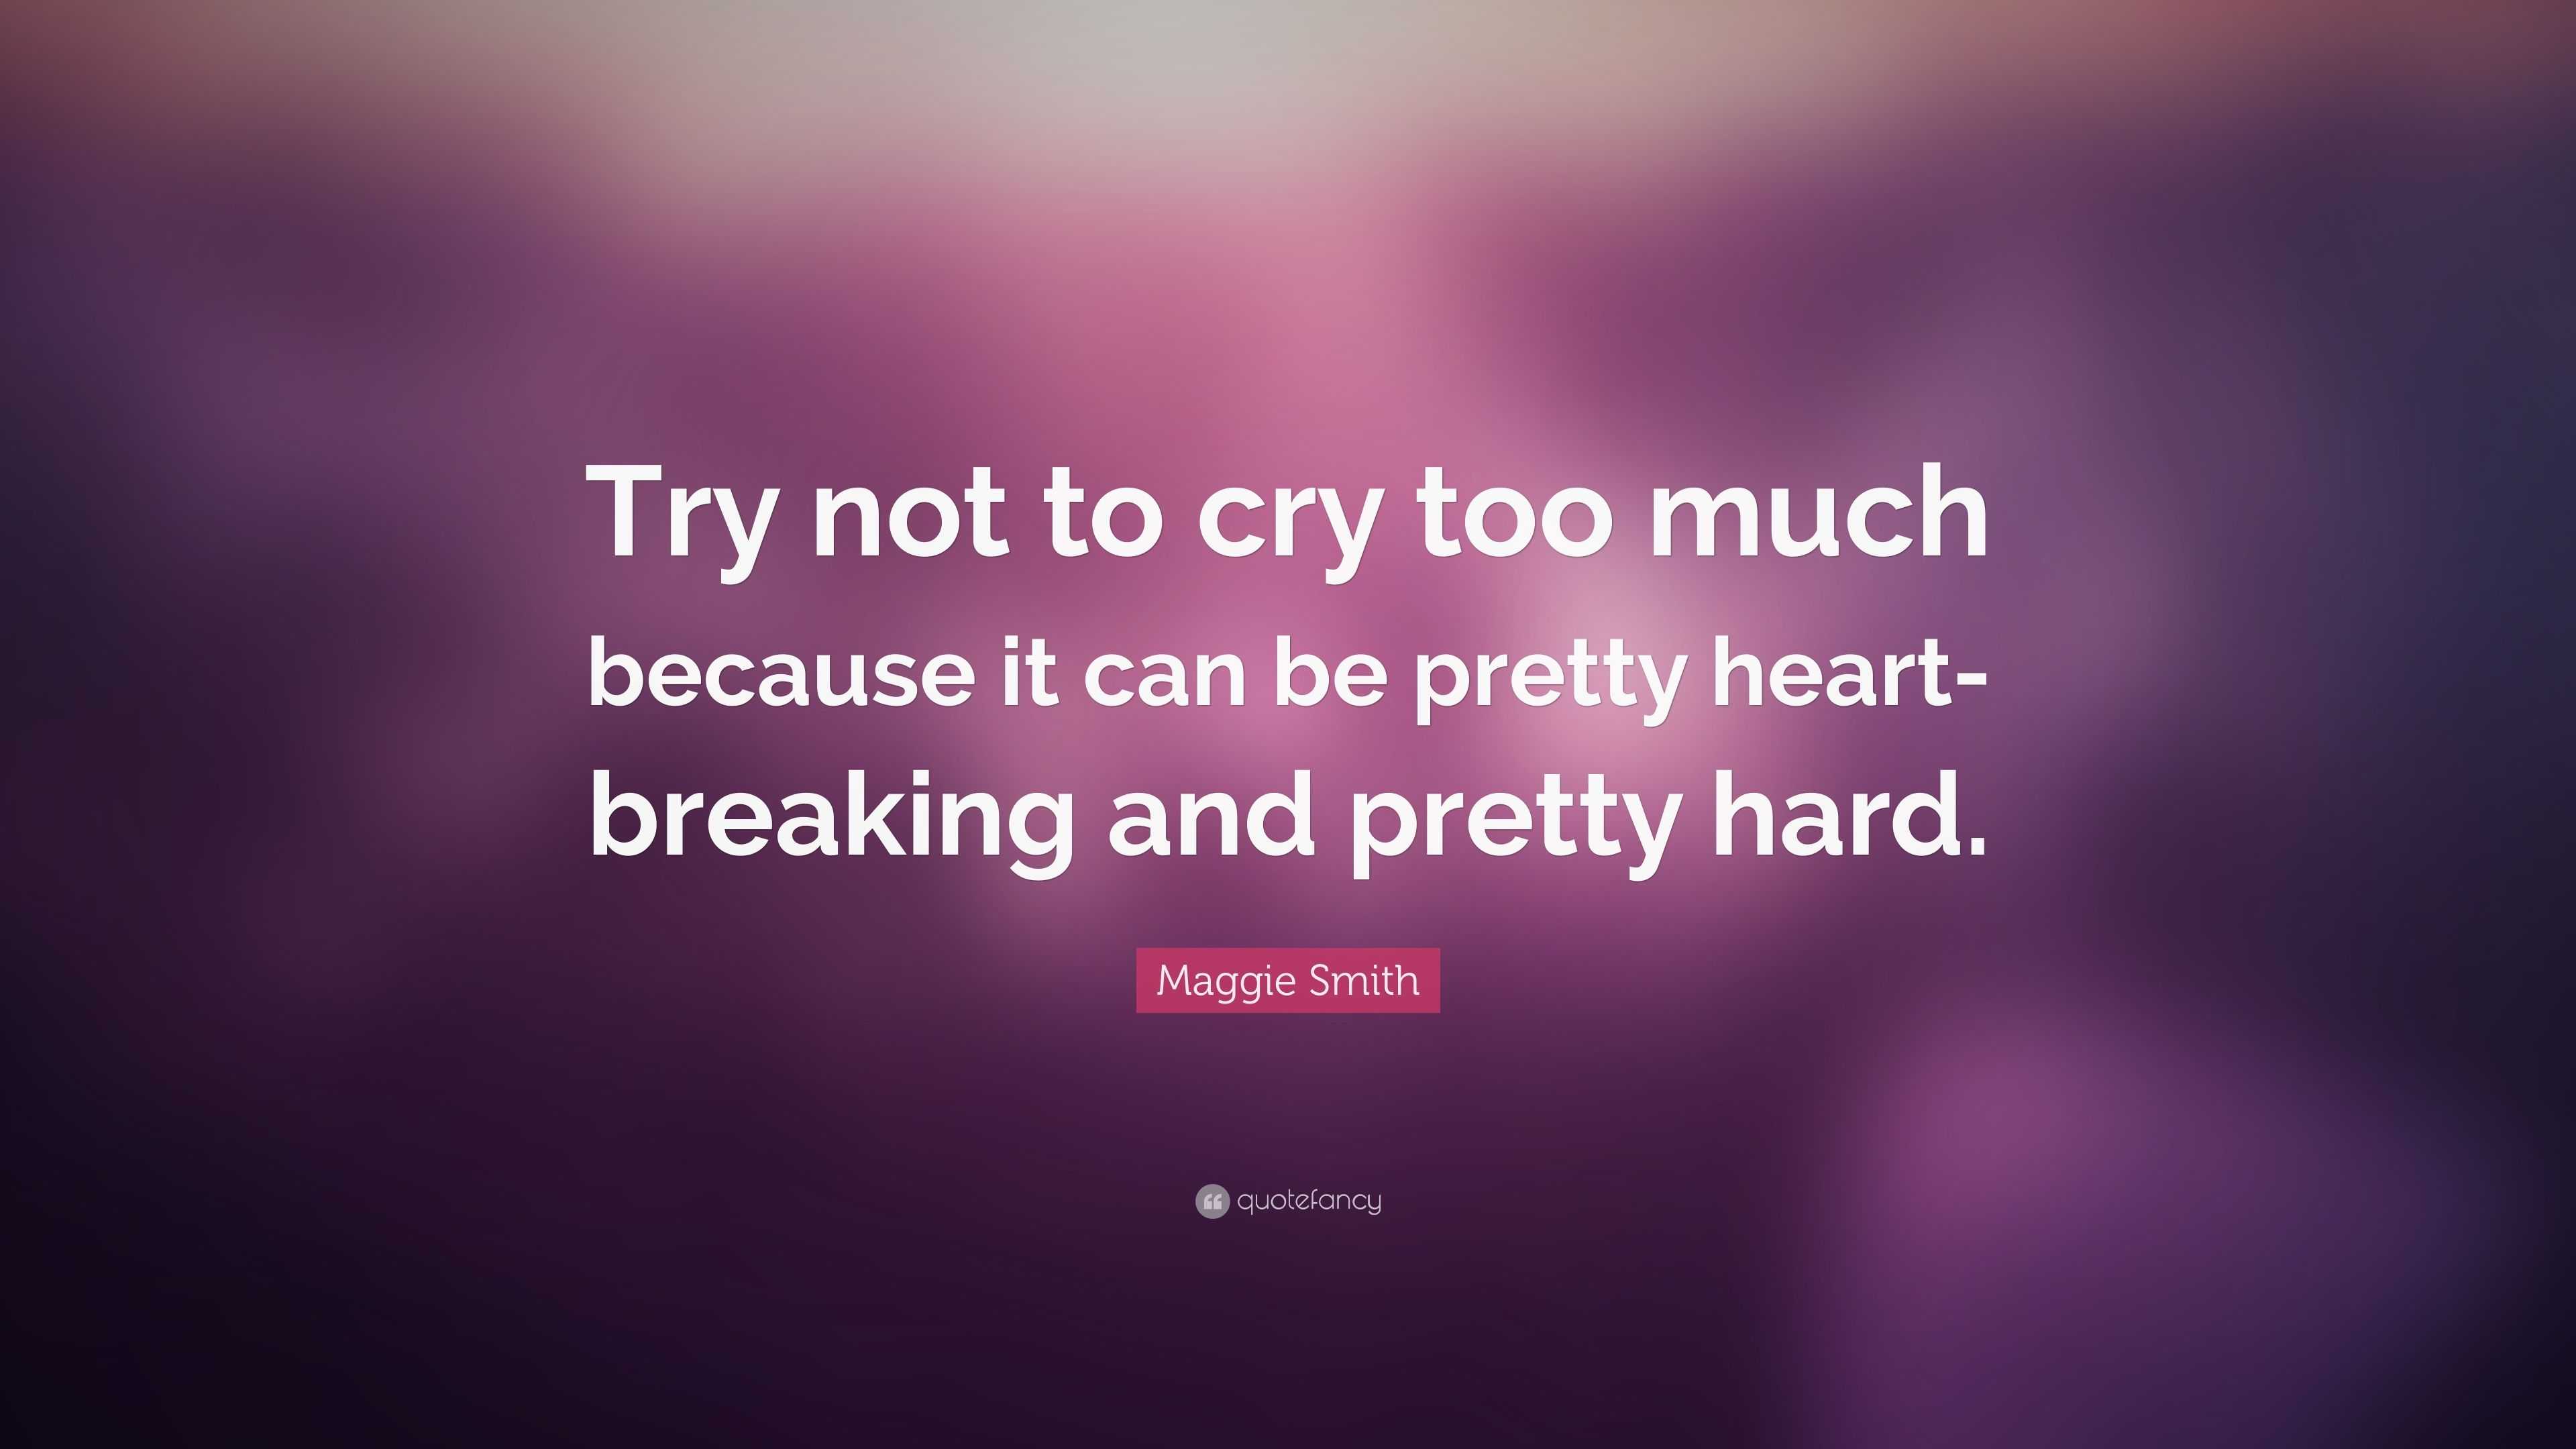 Maggie Smith Quote: “Try not to cry too much because it can be pretty ...